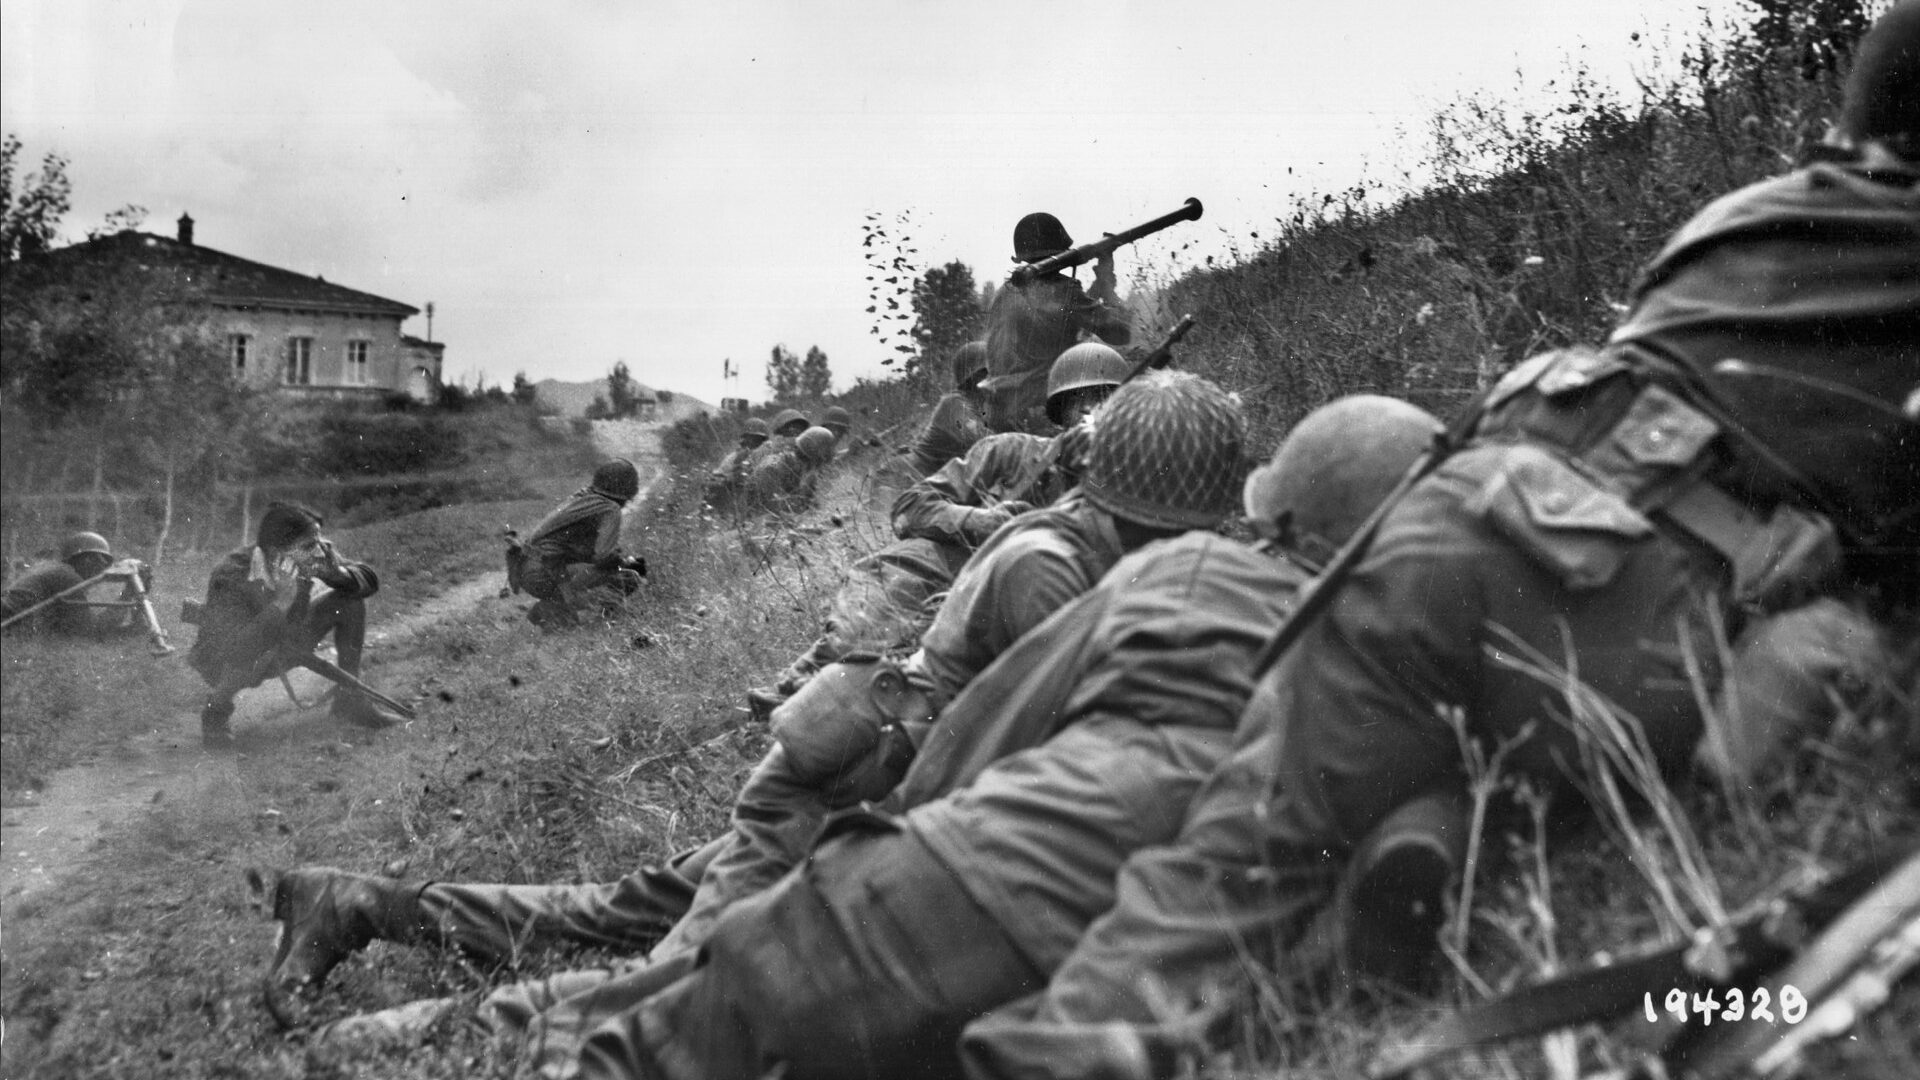 Soldiers of the 92nd Infantry Division engage the Germans on September 7, 1944, three miles north of the town of Lucca, Italy. A soldier rises up to fire a bazooka at a German machine-gun nest just 30 yards from the American position, while an Italian partisan at left covers his ears.